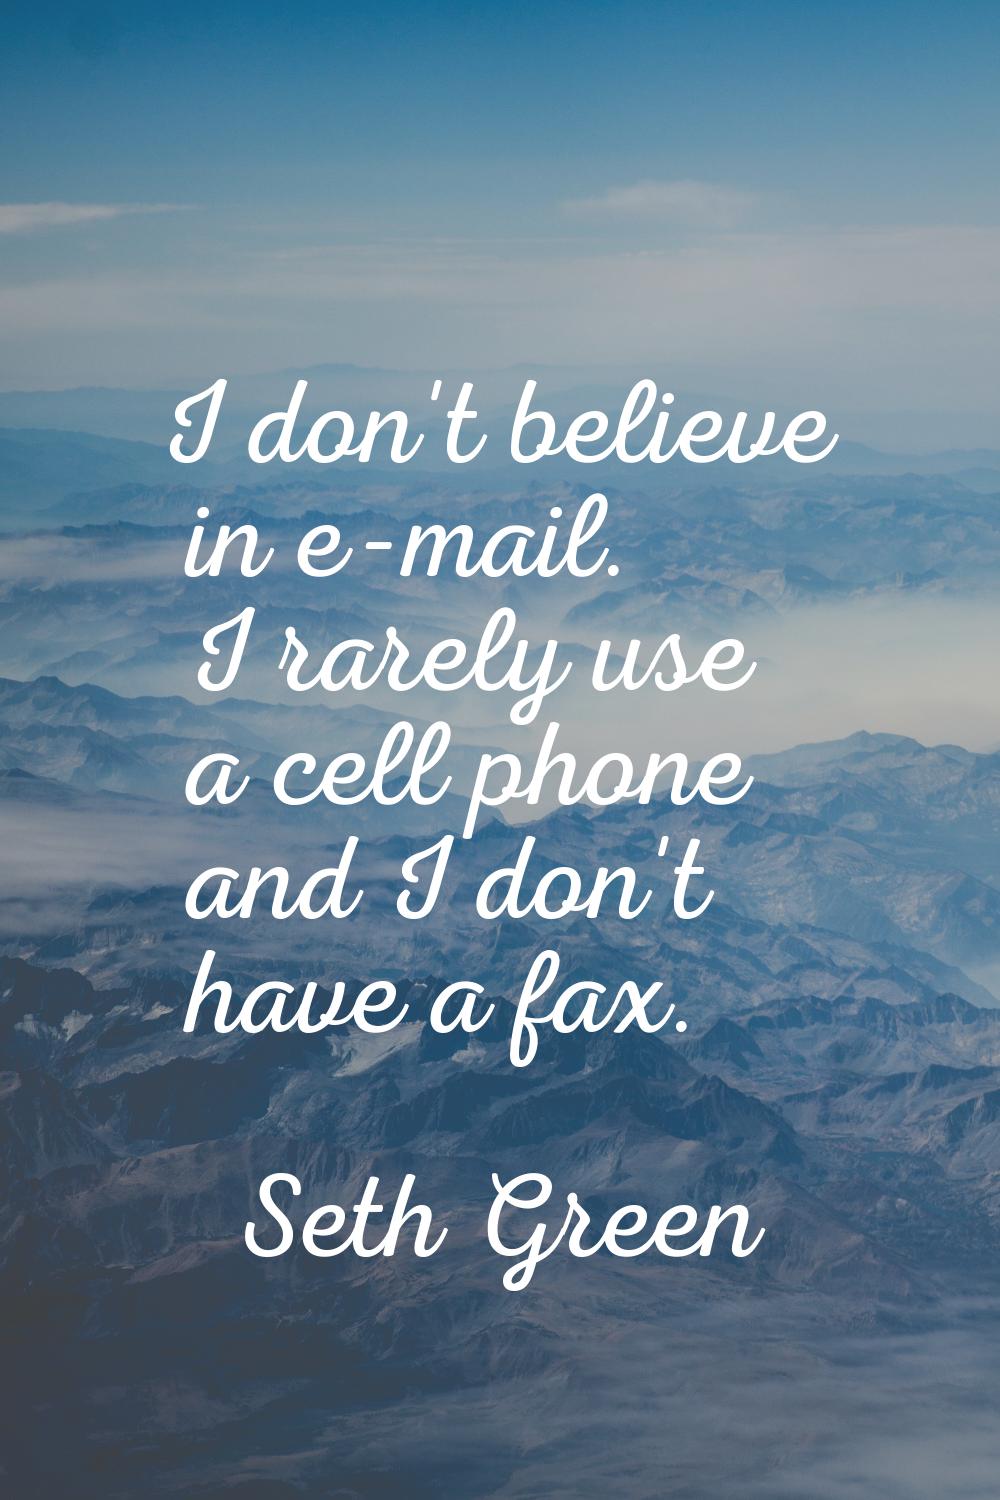 I don't believe in e-mail. I rarely use a cell phone and I don't have a fax.